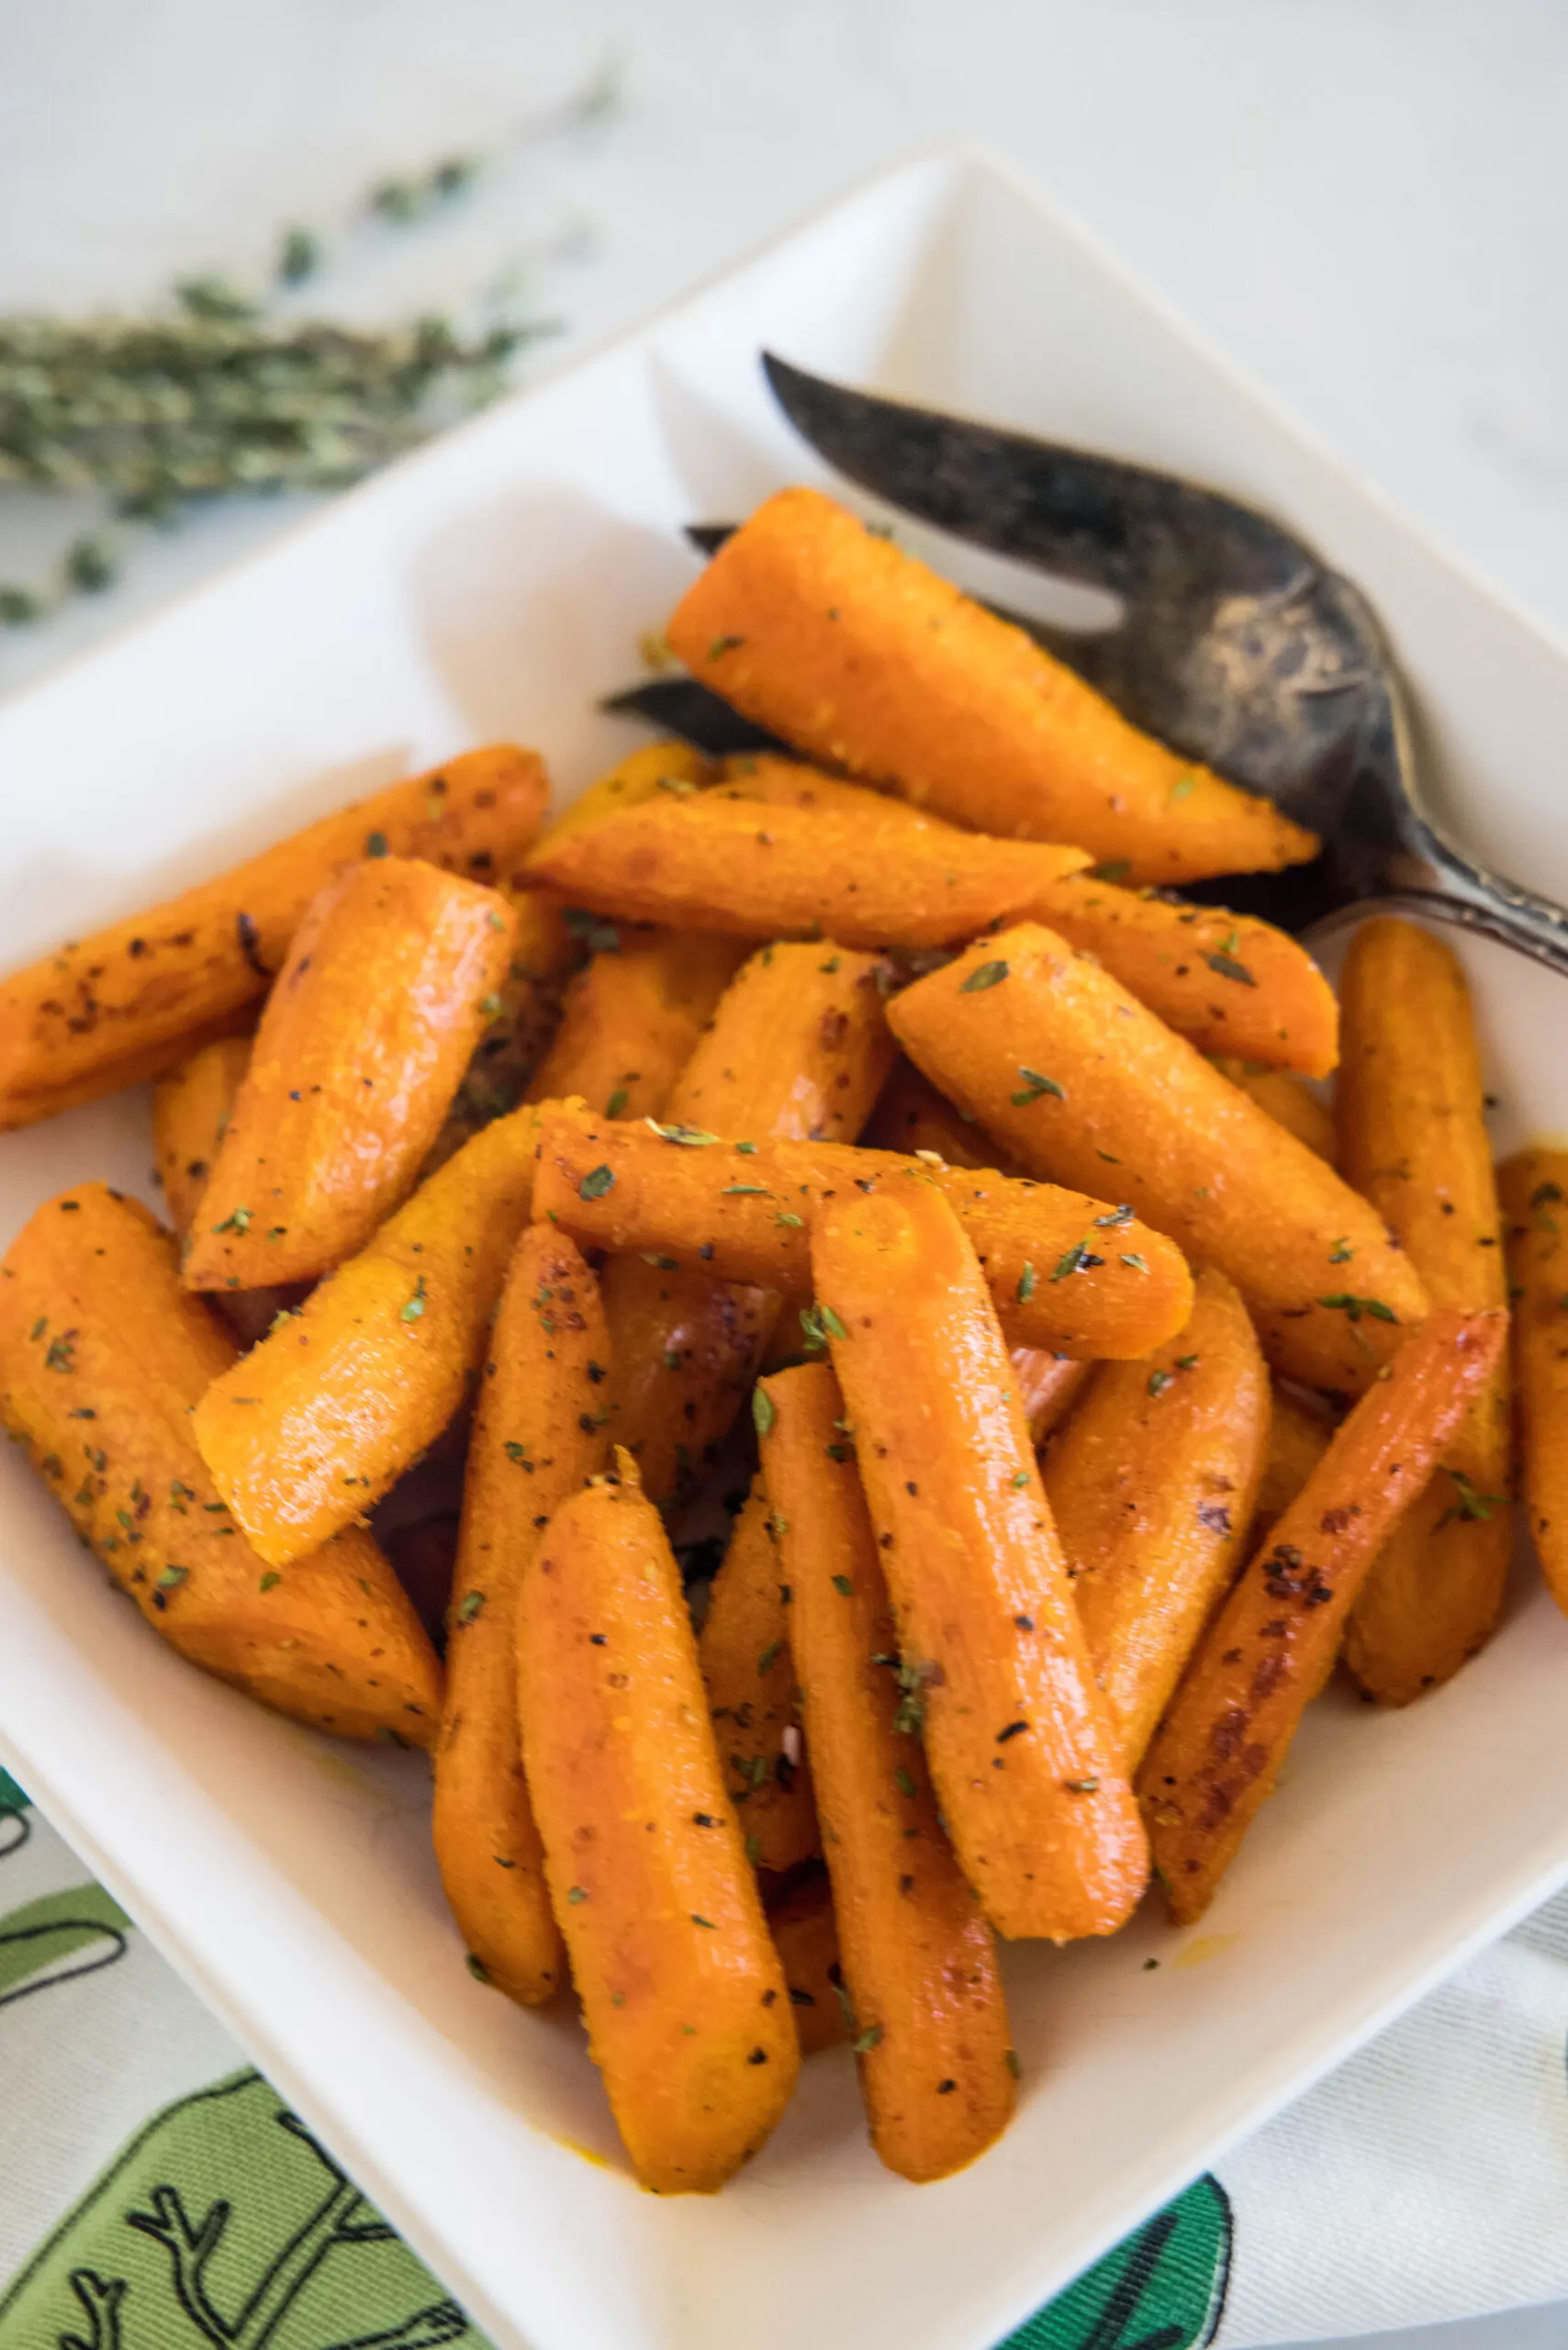 Seasoned roasted carrots in a square white bowl with a serving spoon.